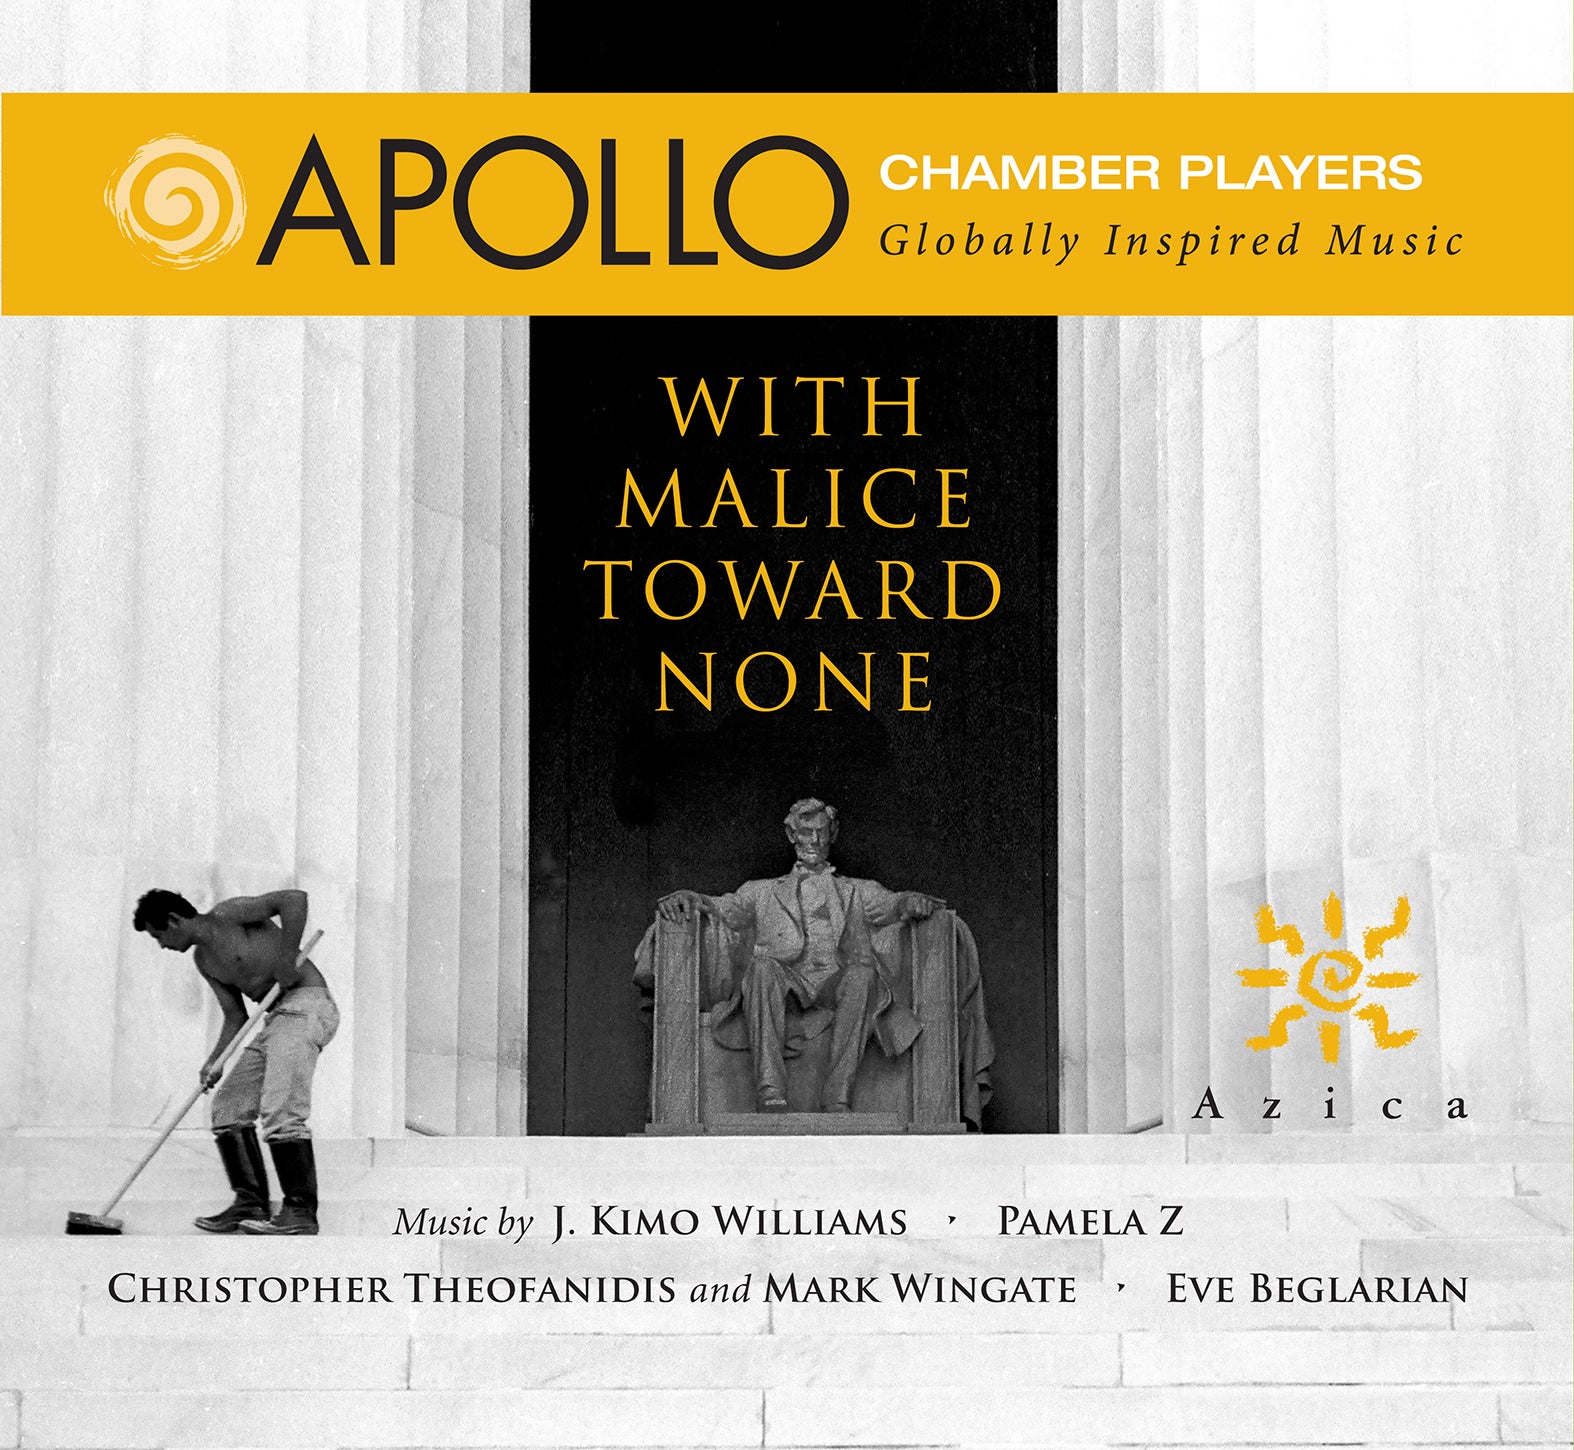 Pamela Z: With Malice Toward None / Apollo Chamber Players